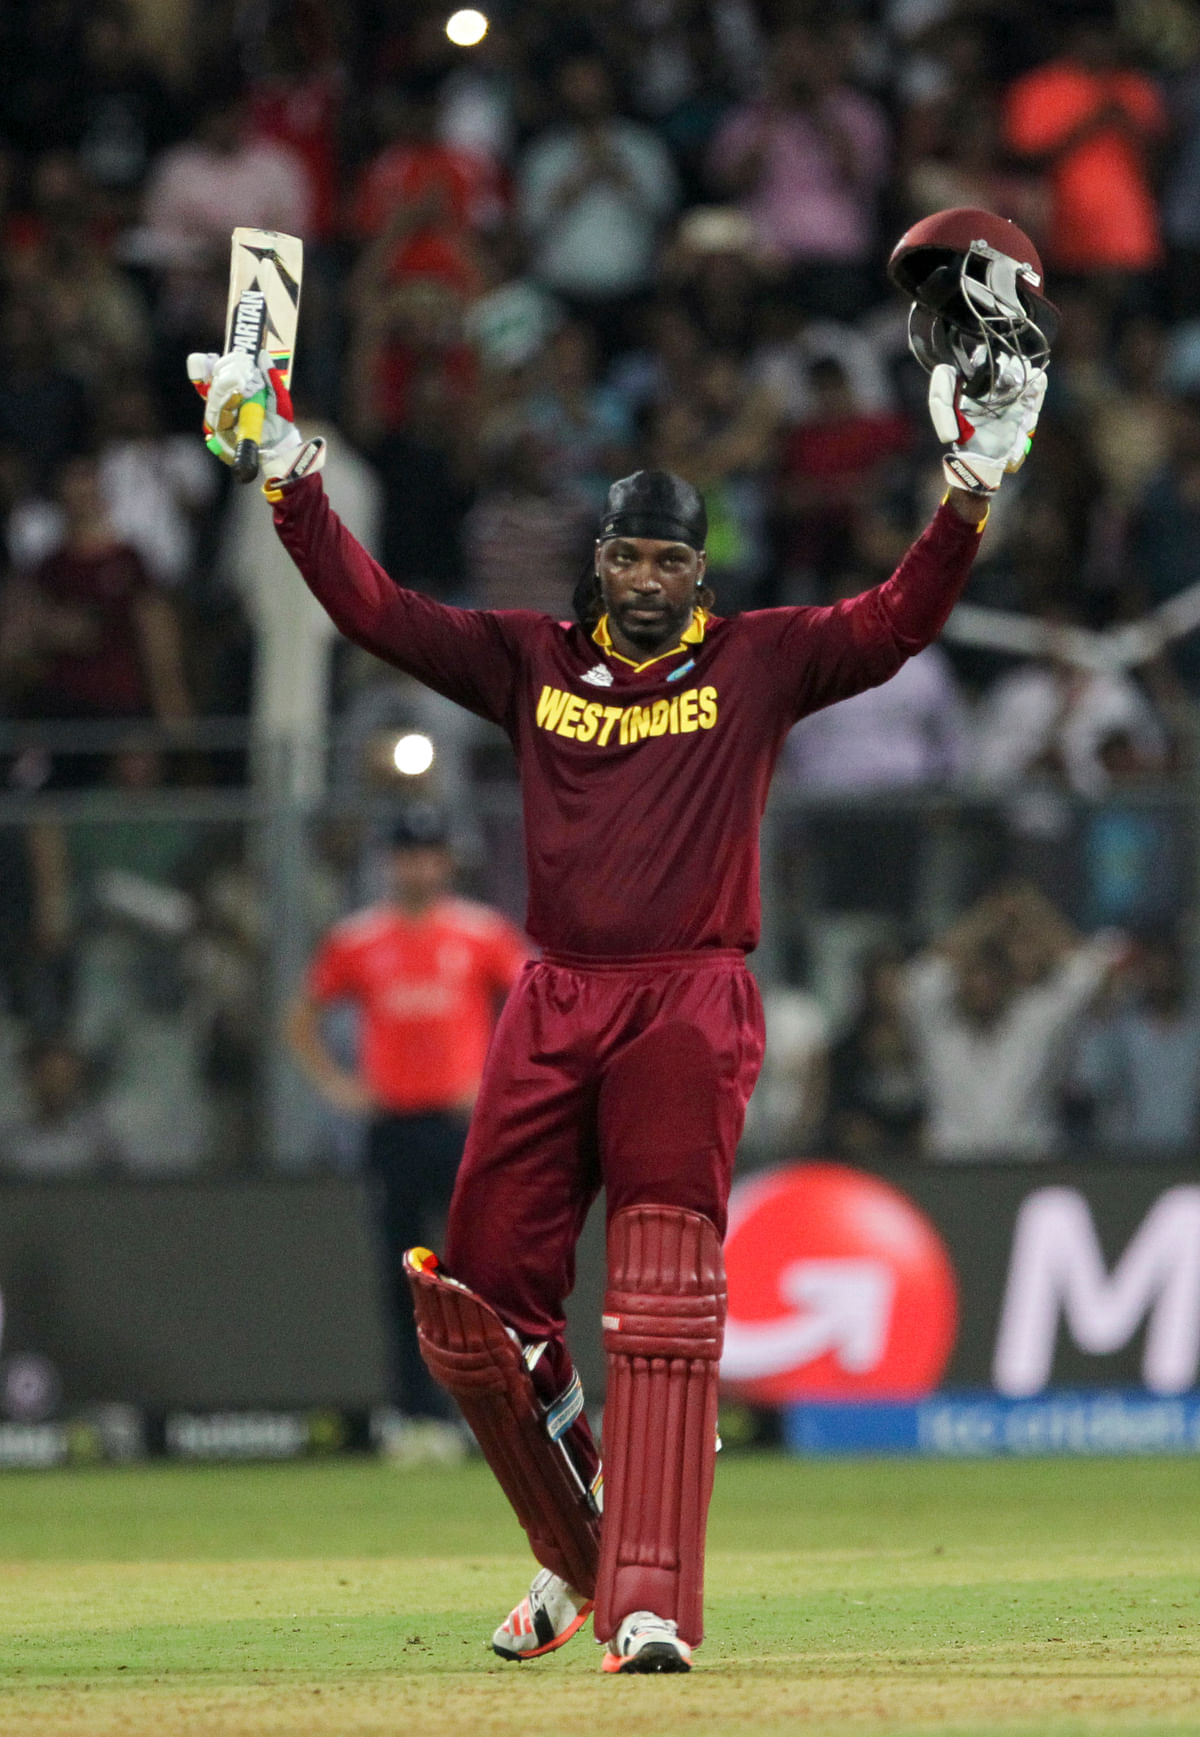 West Indies cruised to their target of 183, helped substantially by Chris Gayle’s 100.